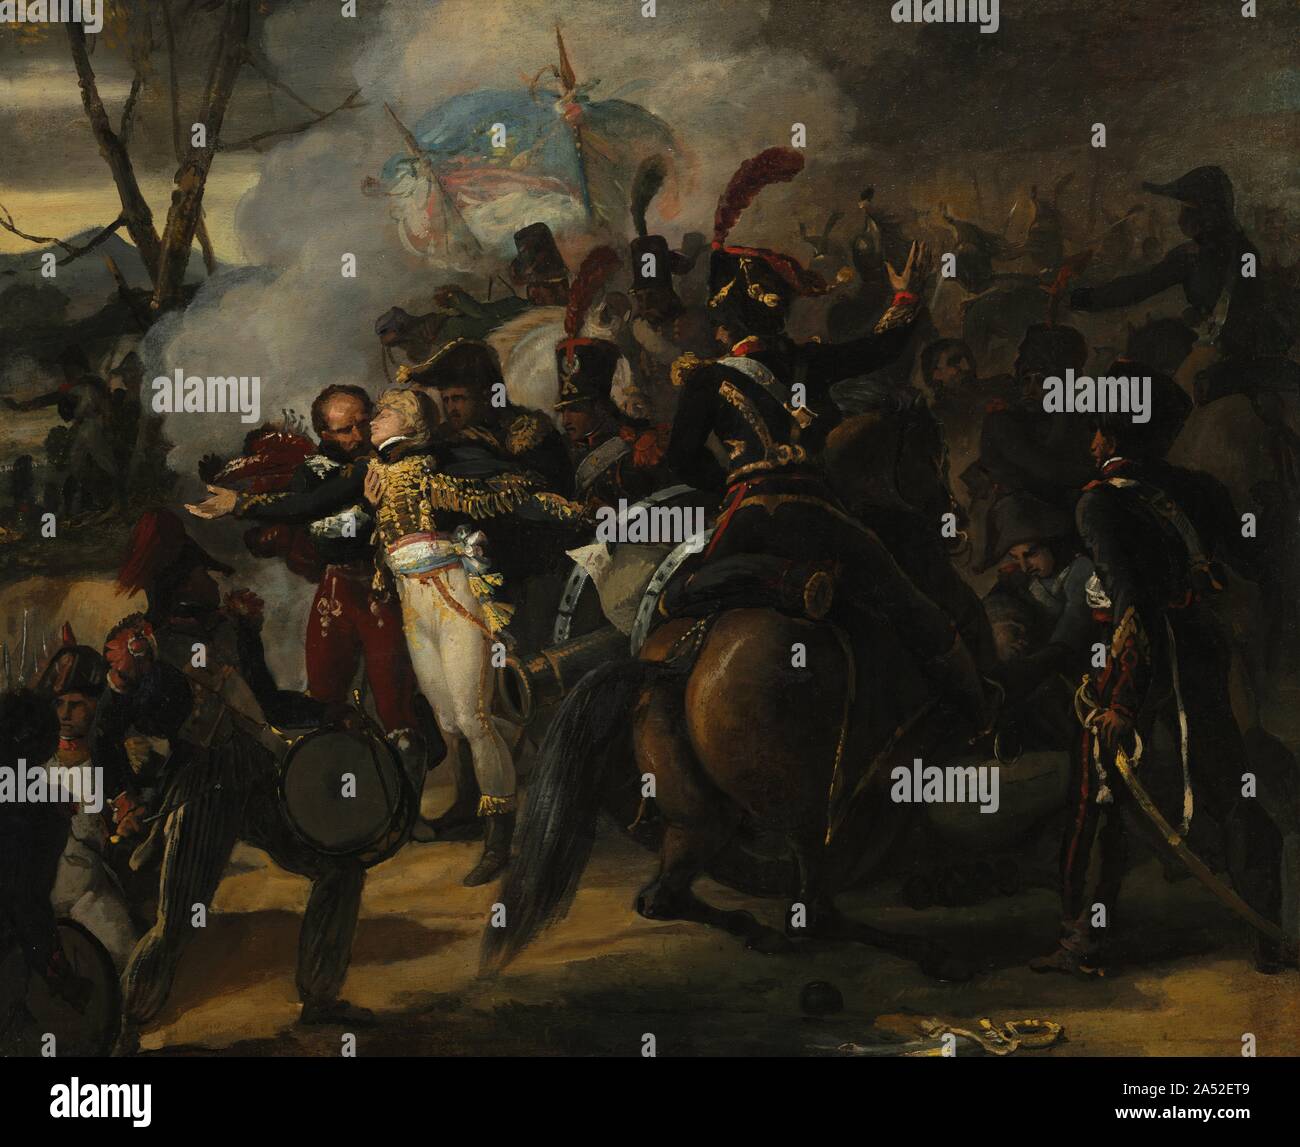 The Death of General Colbert, c. 1809/1810. In 1809, the popular young French military hero General Auguste Colbert died at a battle in Spain. The following year, Schnetz depicted the moment of Colbert's death. This is the study for a much larger painting exhibited at the Paris Salon, but now lost. The exploits of Napoleon and his army were popular subjects for French artists whose work was shown in official exhibitions. Stock Photo